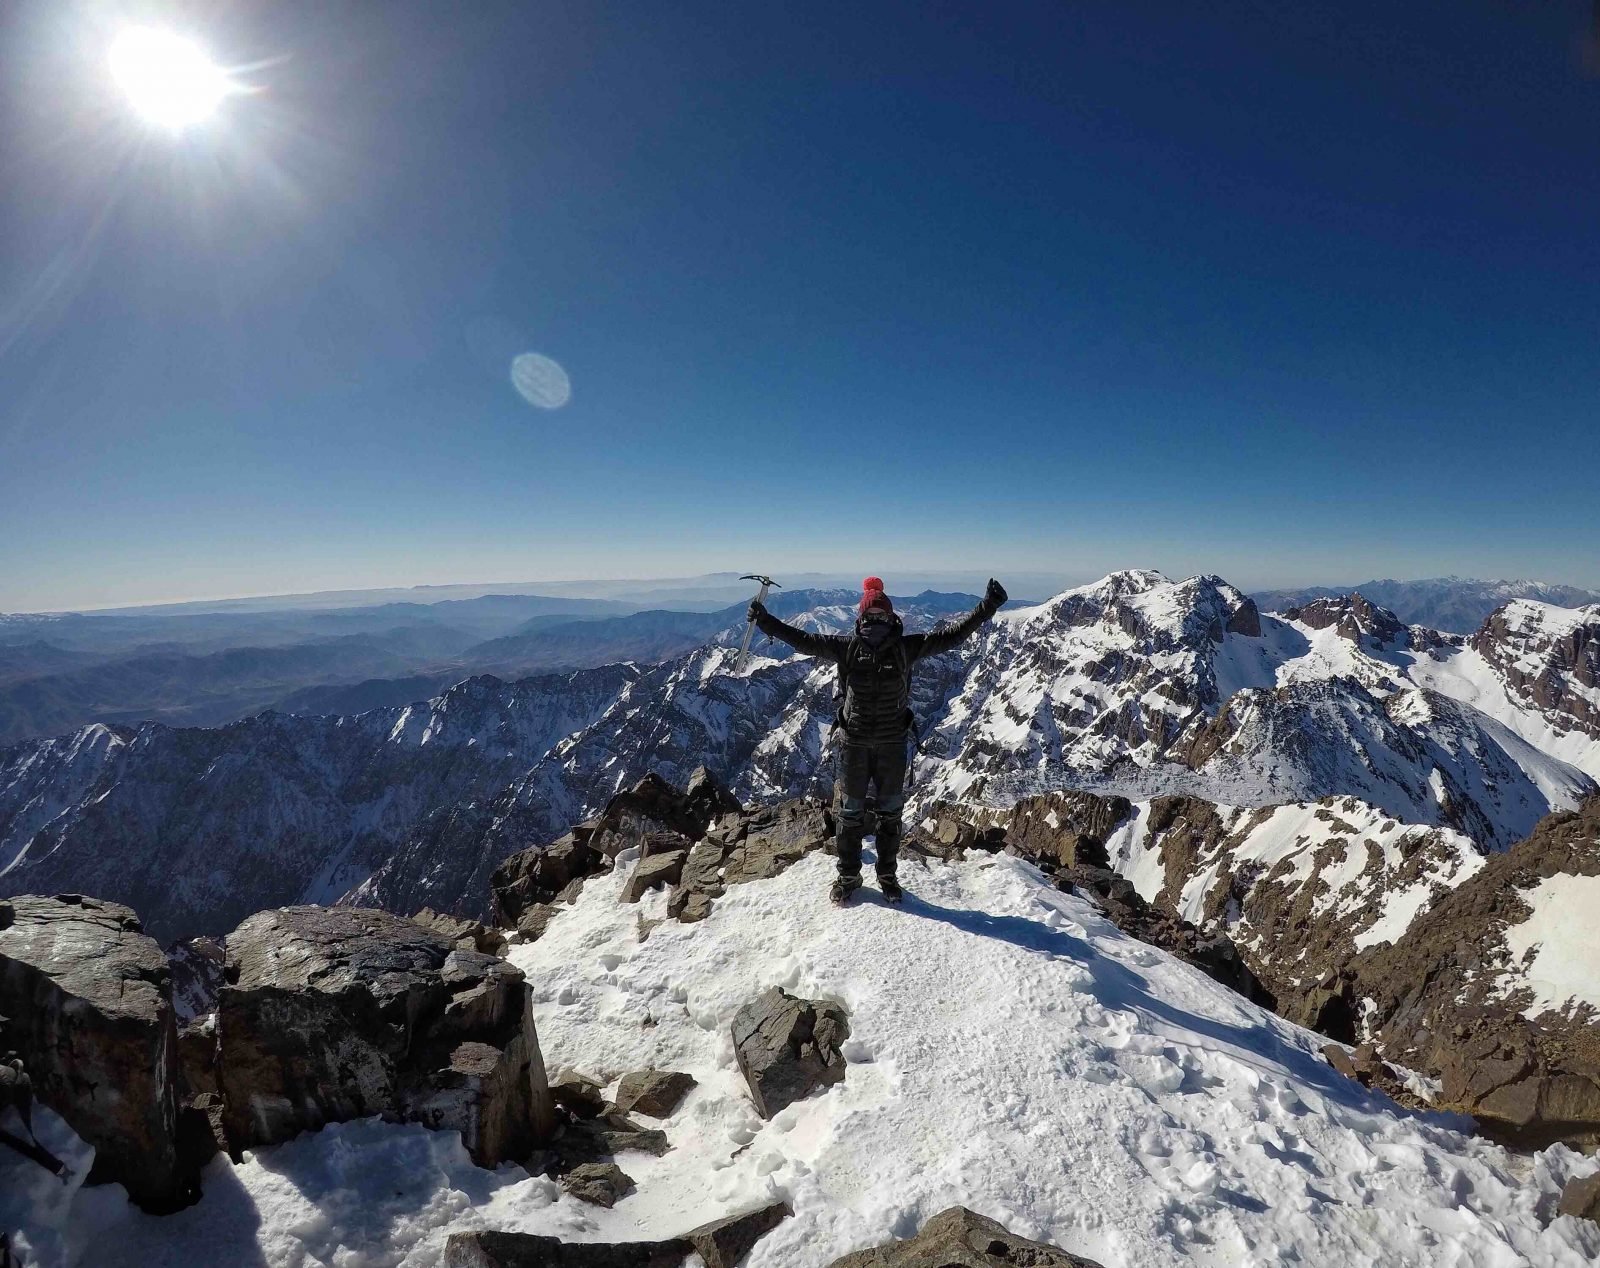 A hiker cheering on the summit of Mount Toubkal.